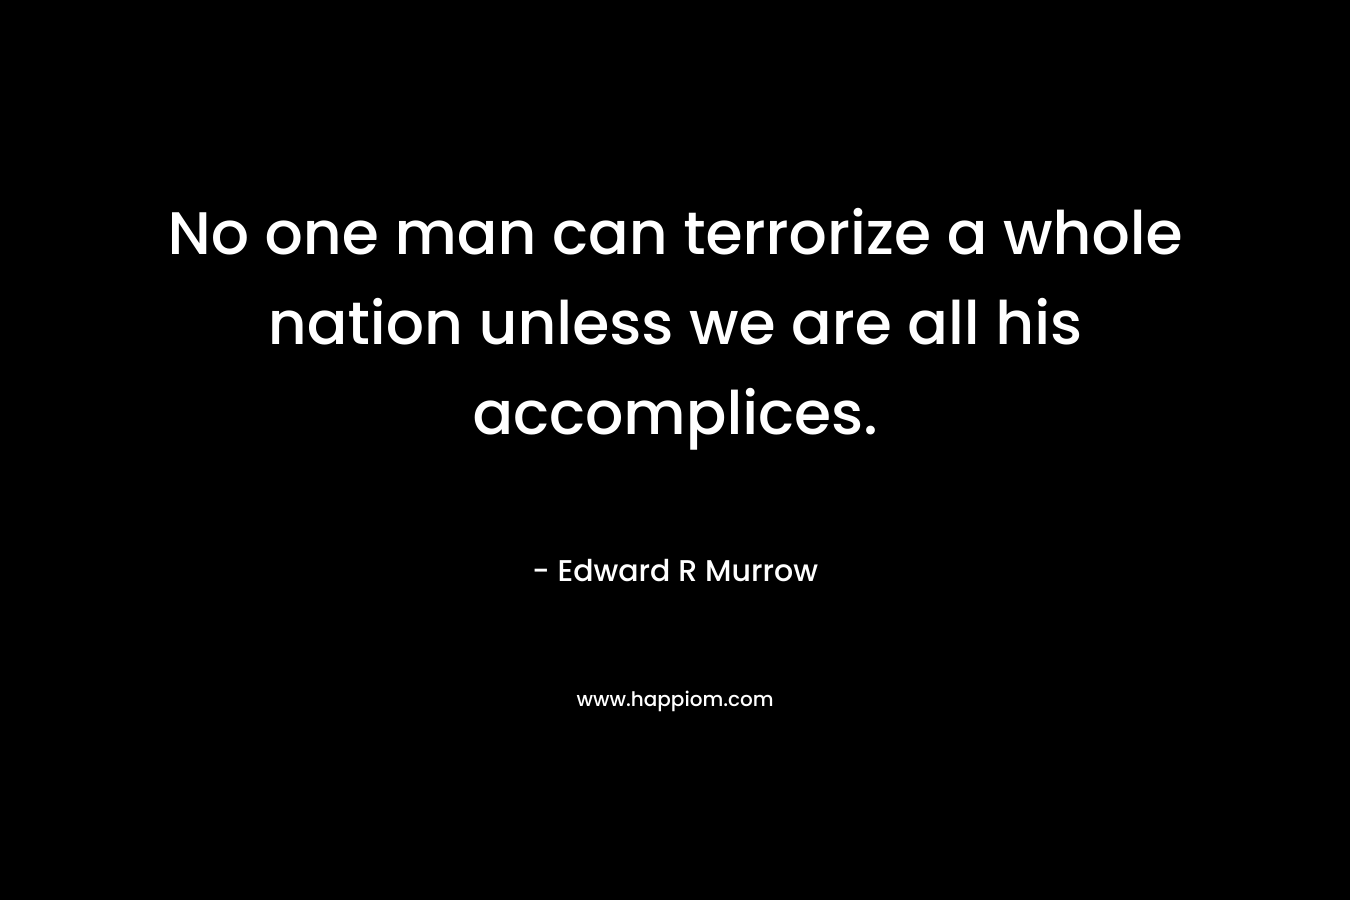 No one man can terrorize a whole nation unless we are all his accomplices. – Edward R Murrow